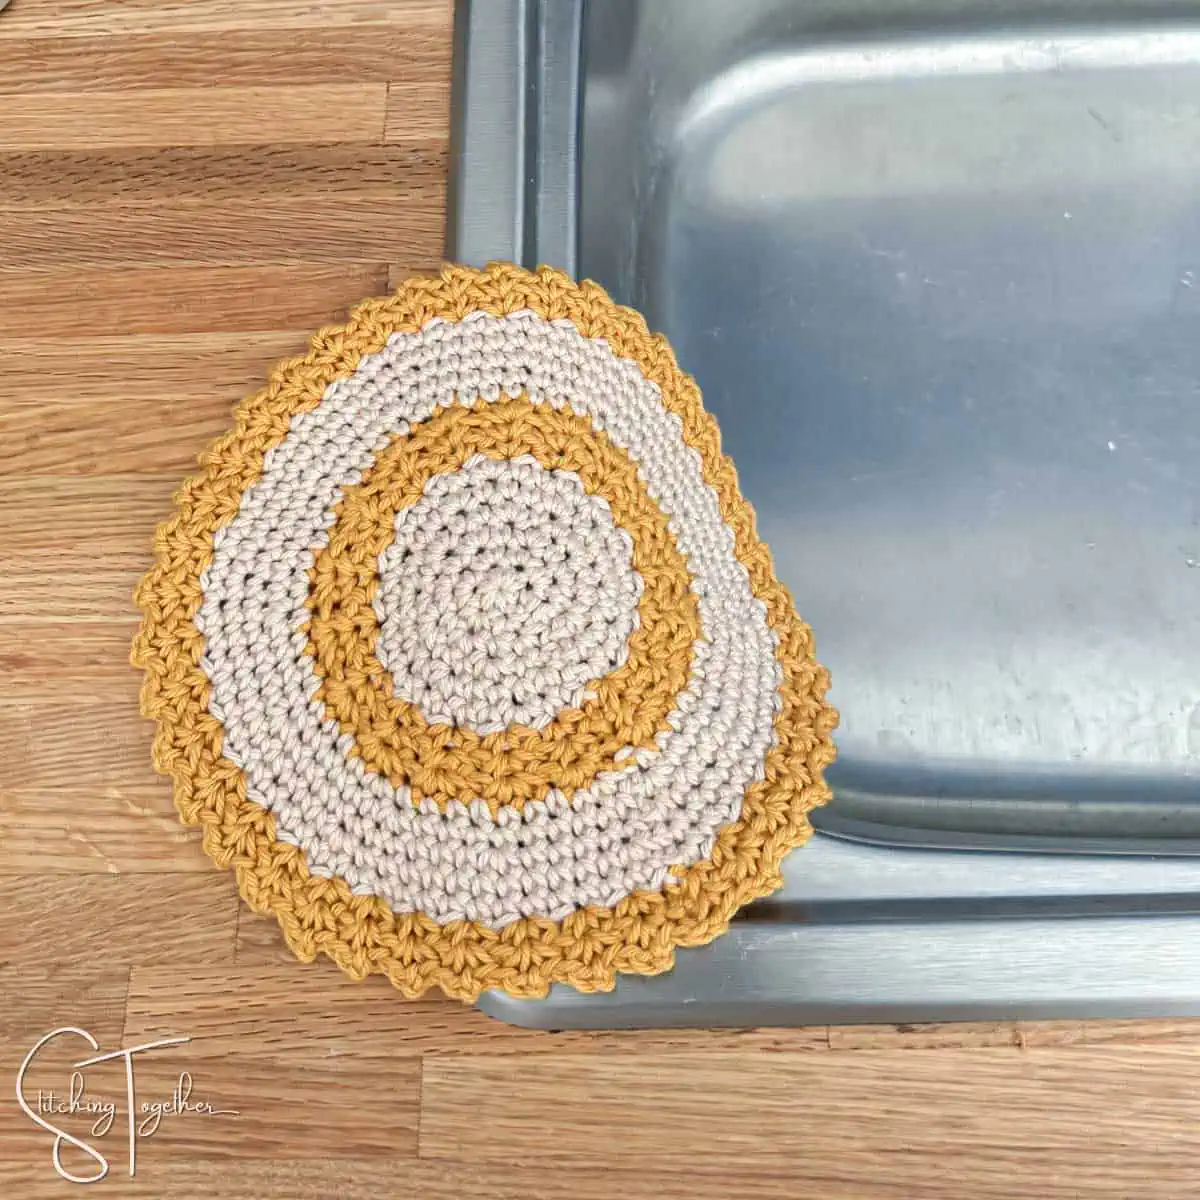 Side by Side - Crocheted Dishcloth, Patterns